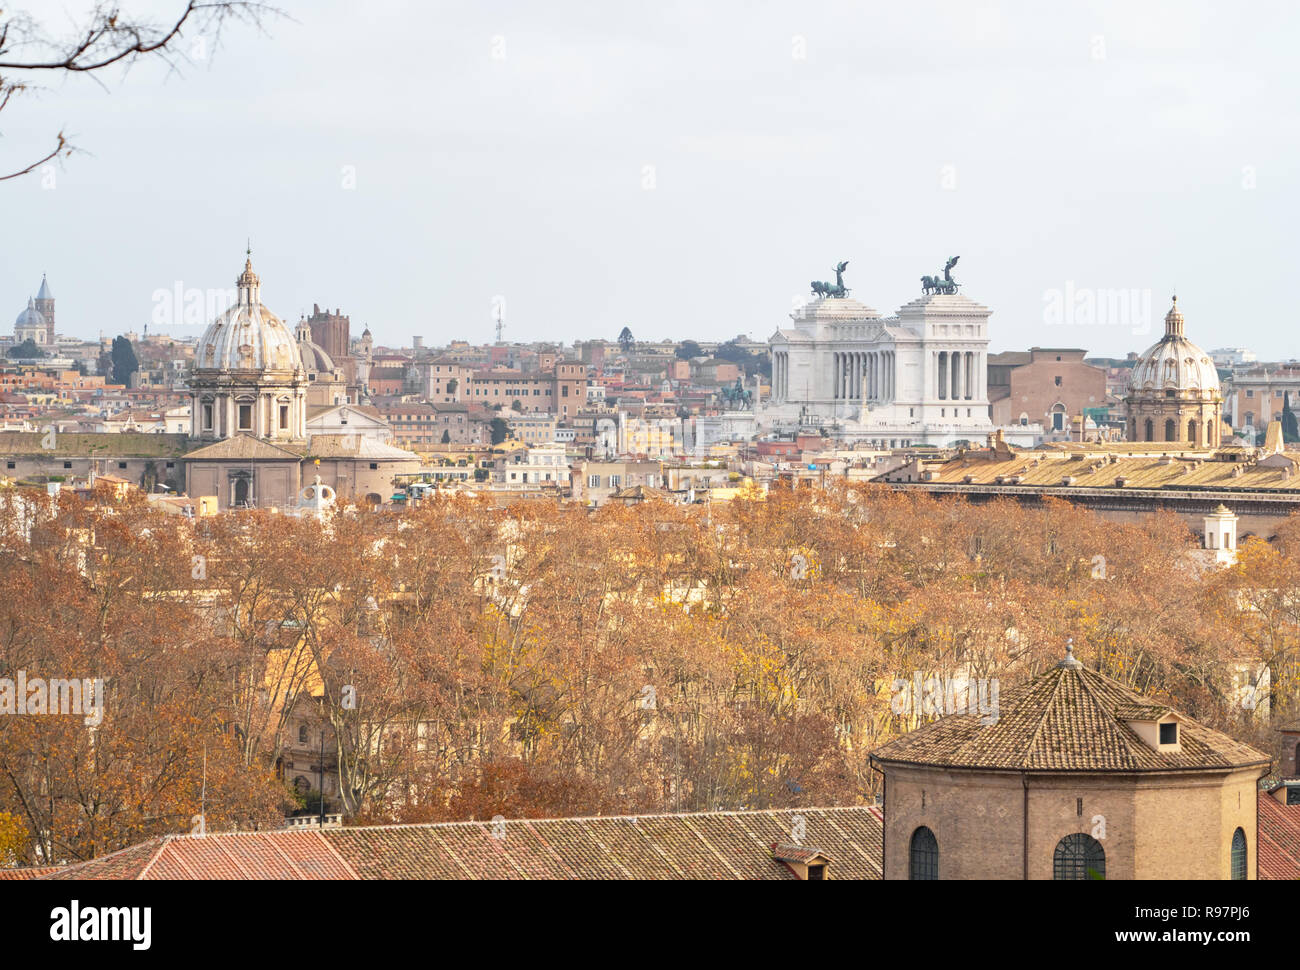 Rome (Italy) - The view of the city from Janiculum hill and terrace, with Vittoriano, Trinità dei Monti church and Quirinale palace. Stock Photo